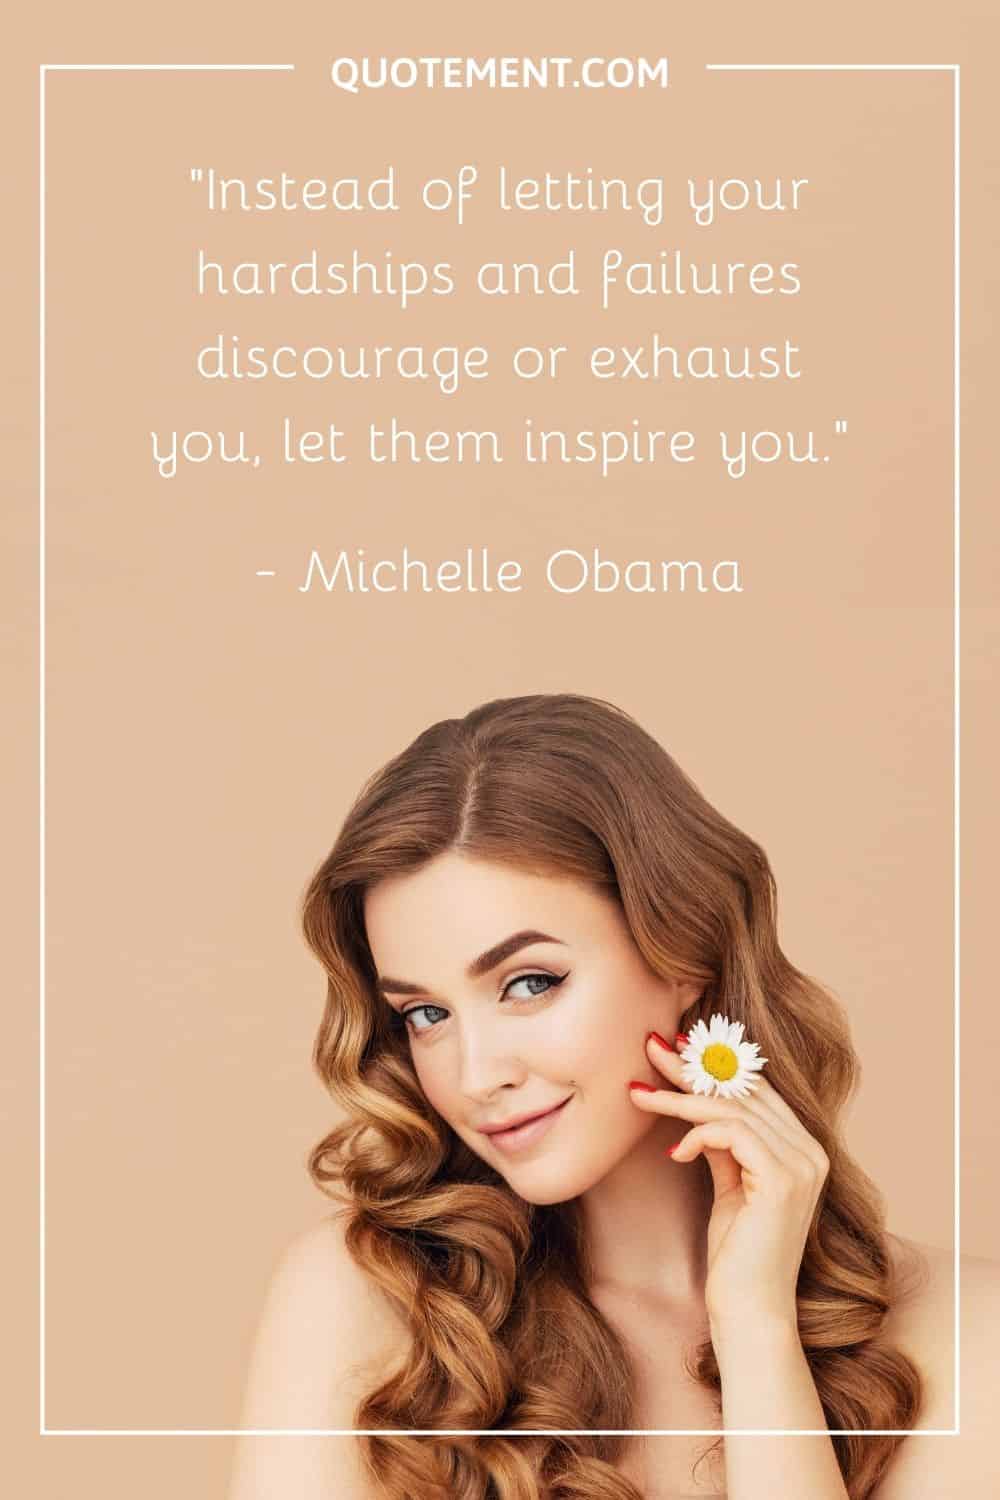 Instead of letting your hardships and failures discourage or exhaust you, let them inspire you